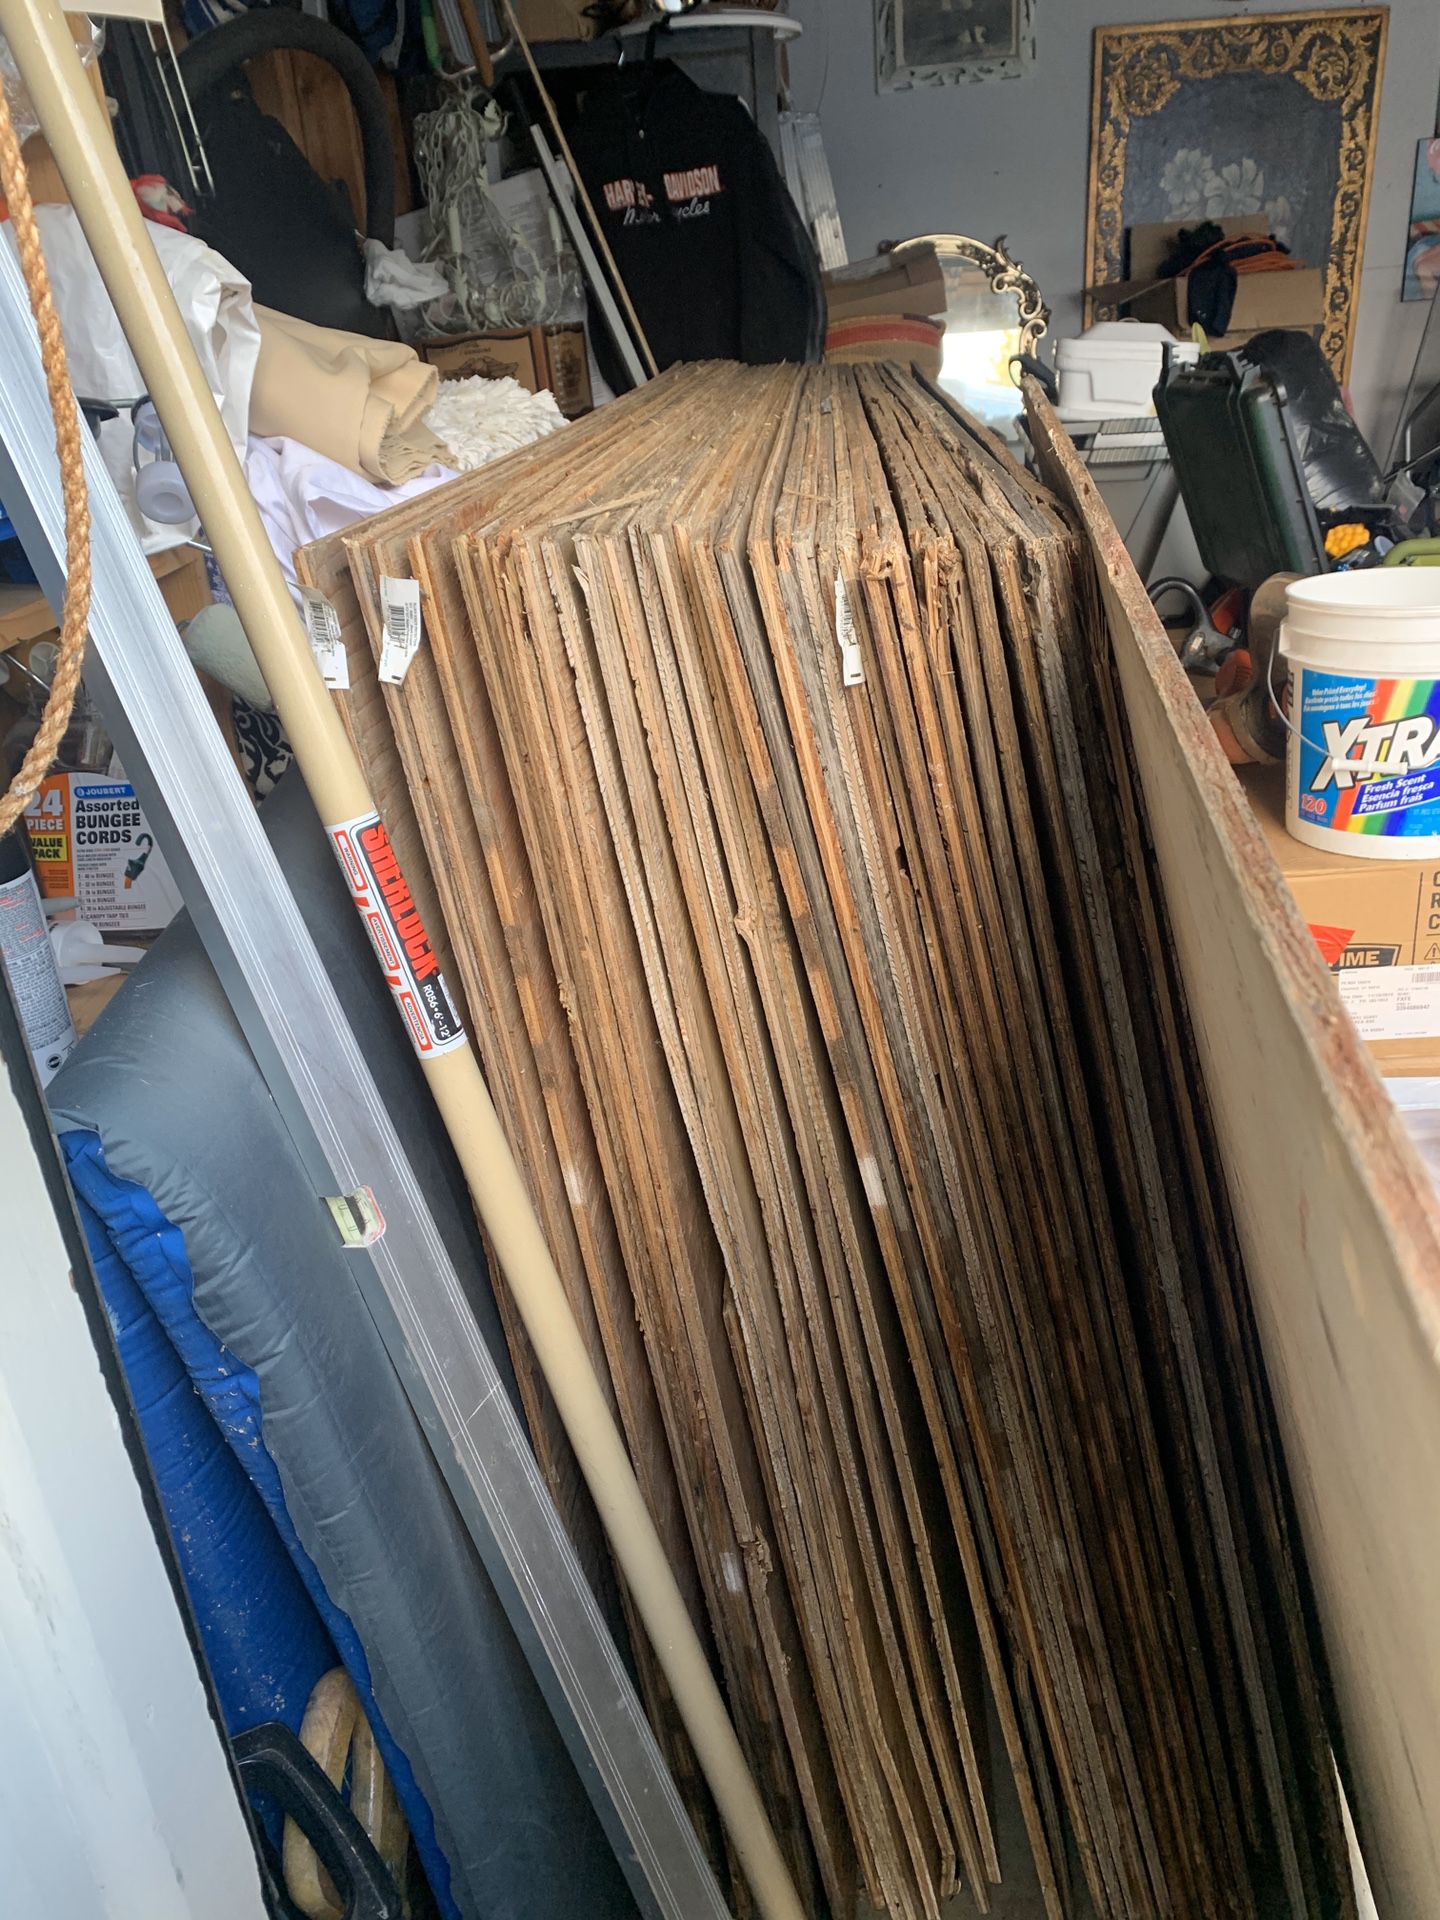 Used plywood for sale 10.00 a sheet